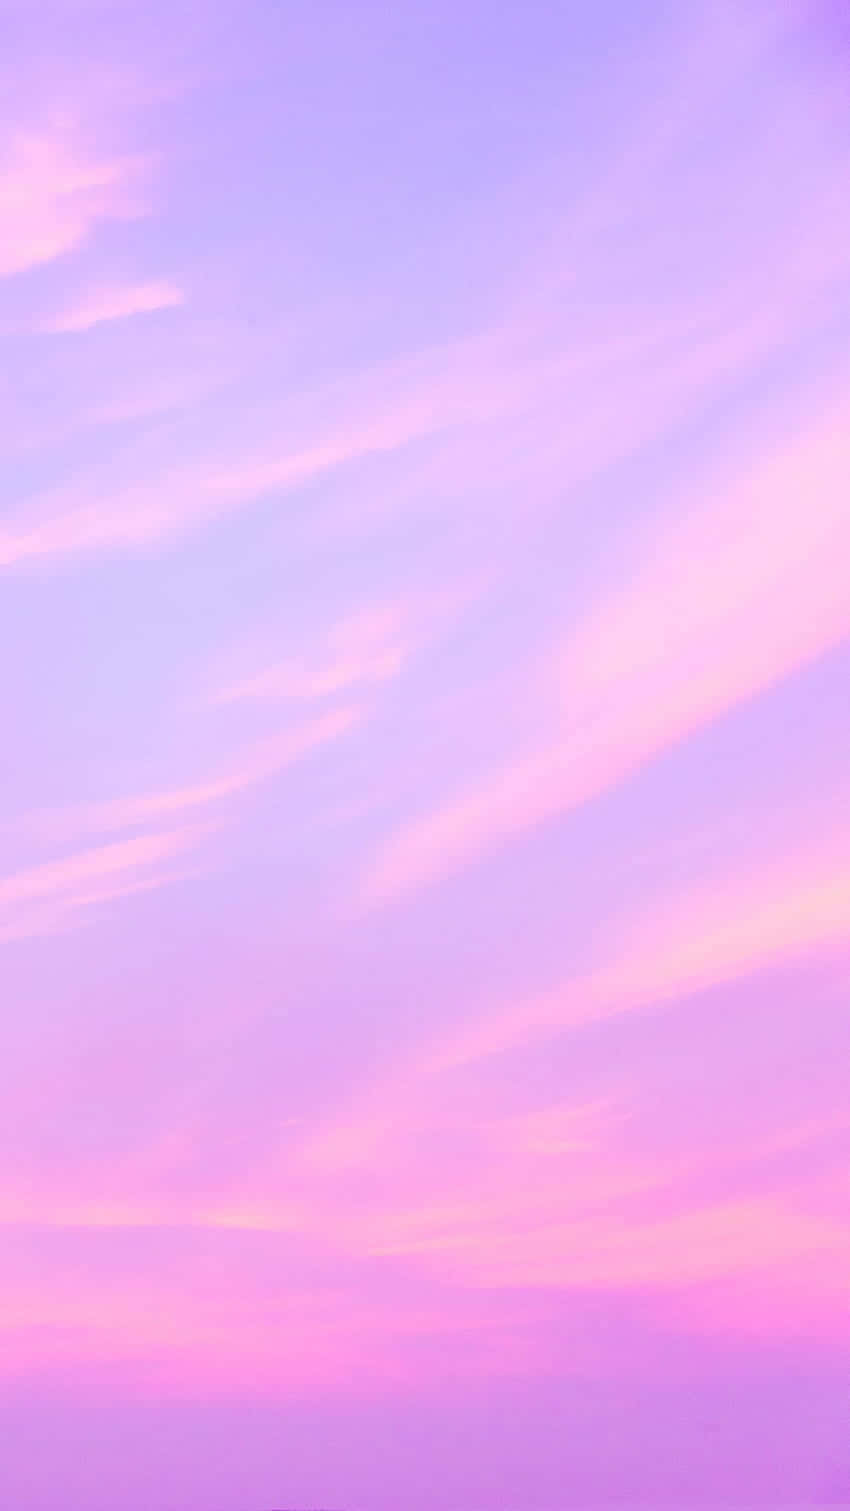 A Colorful, Soft and Dreamy Aesthetic Wallpaper